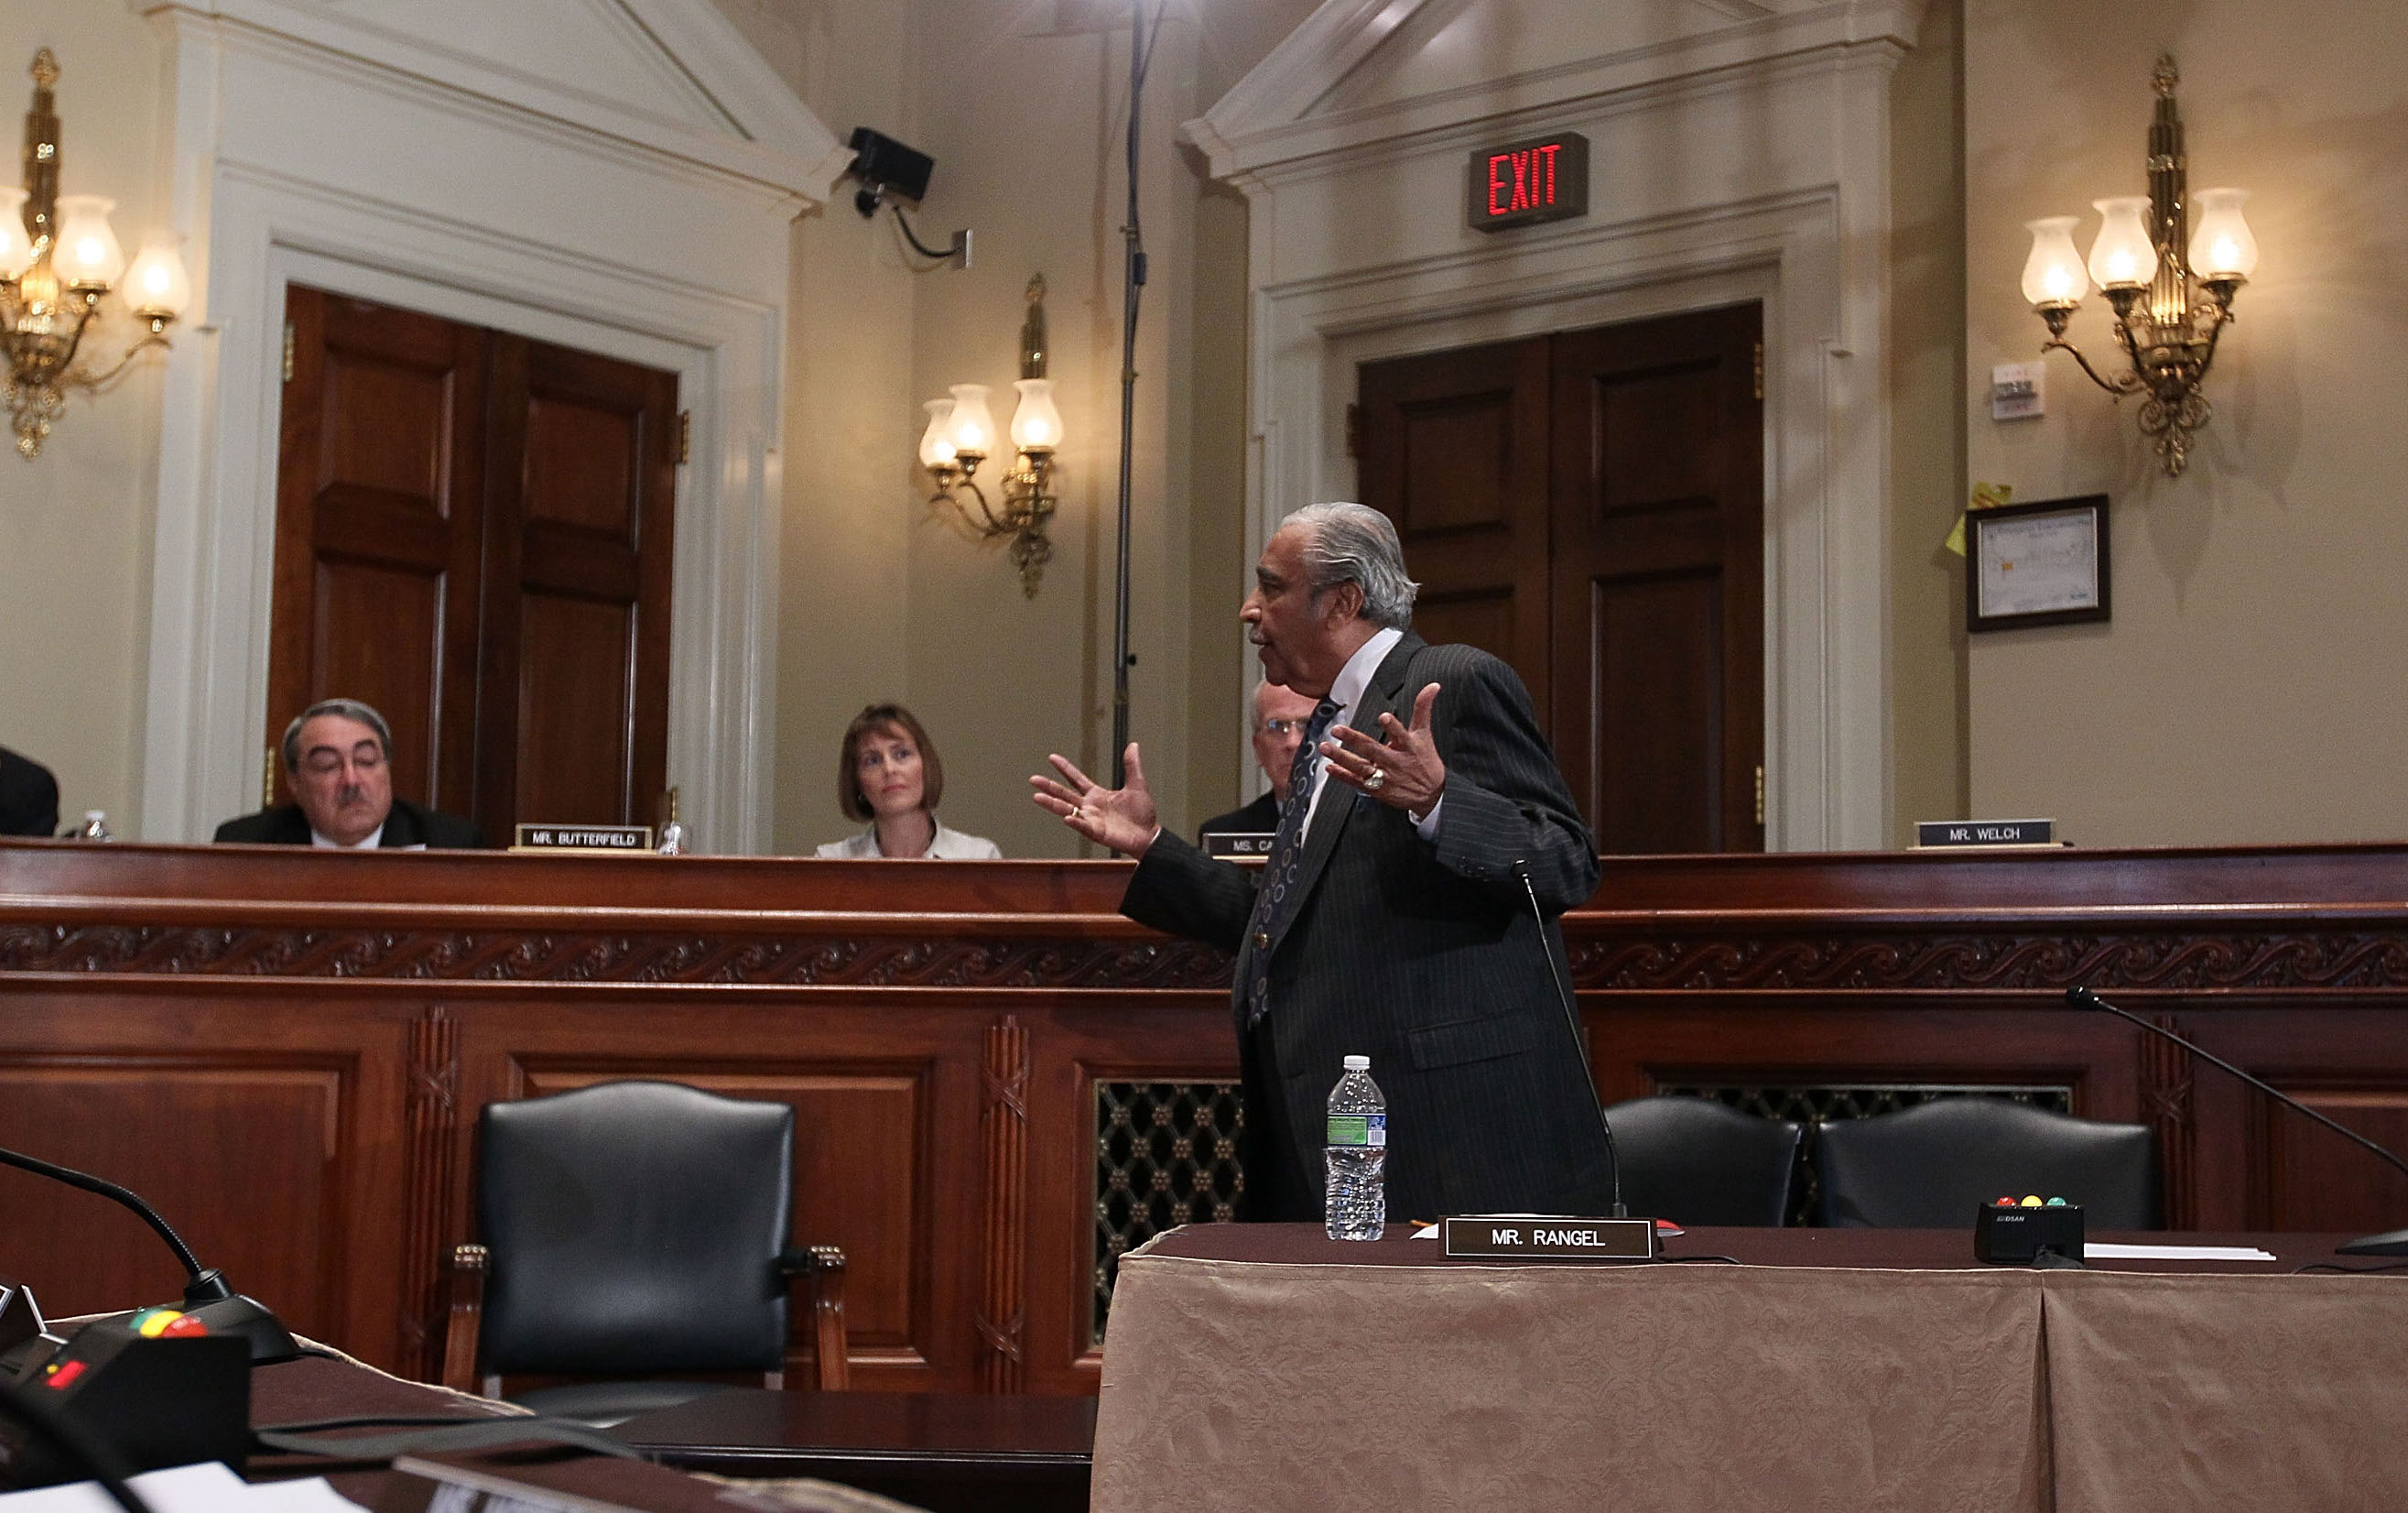 Rep. Charlie Rangel (D-NY), right, speaks during a House Committee on Standards of Official Conduct hearing on Nov 18, 2010 in Washington. 